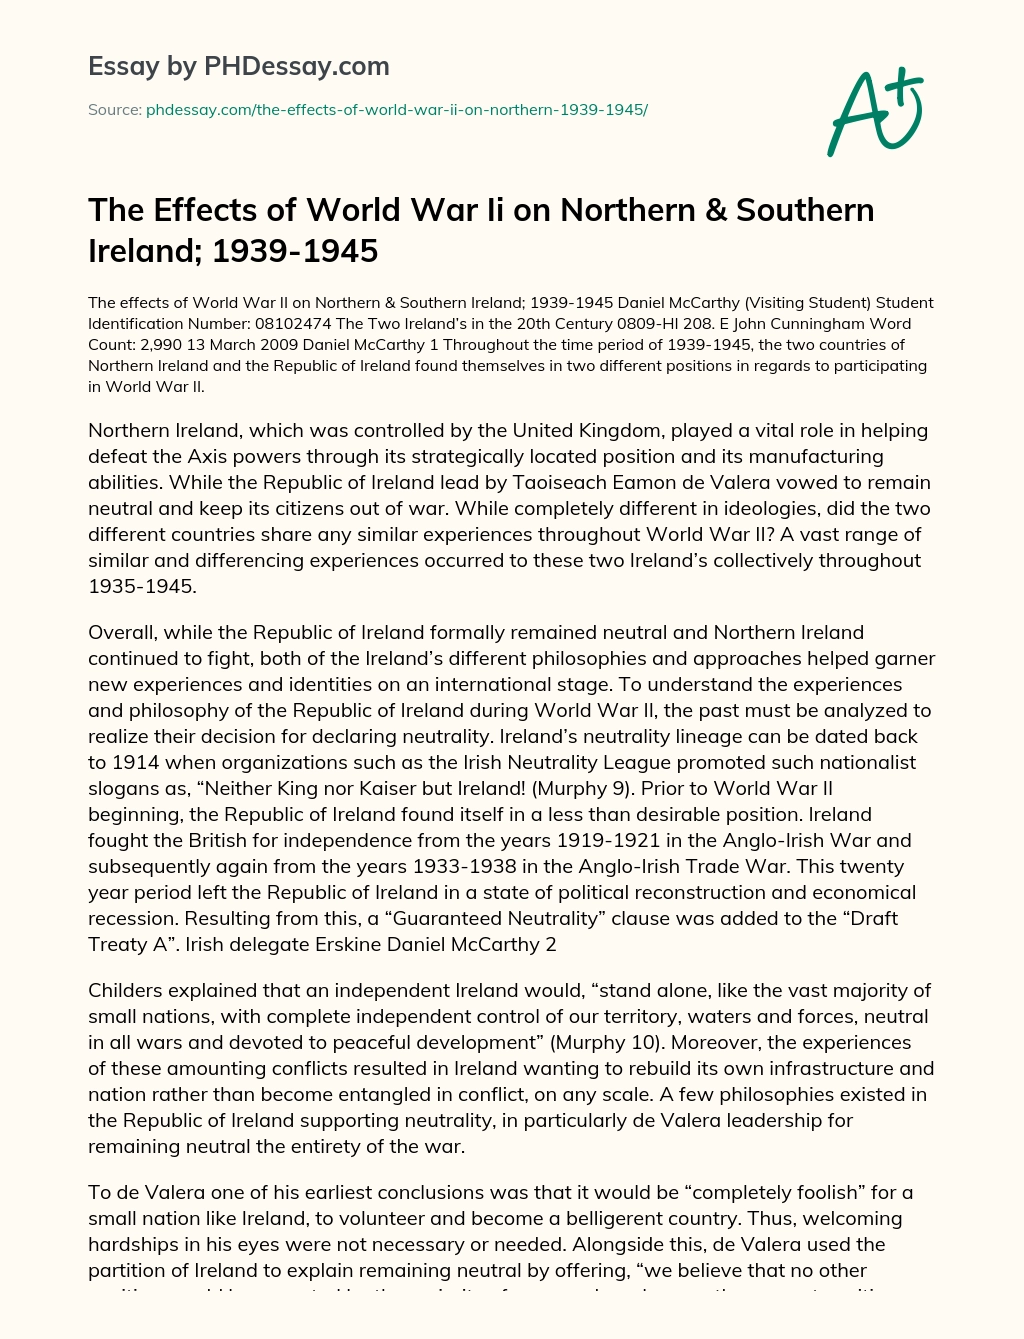 The Effects of World War Ii on Northern & Southern Ireland; 1939-1945 essay